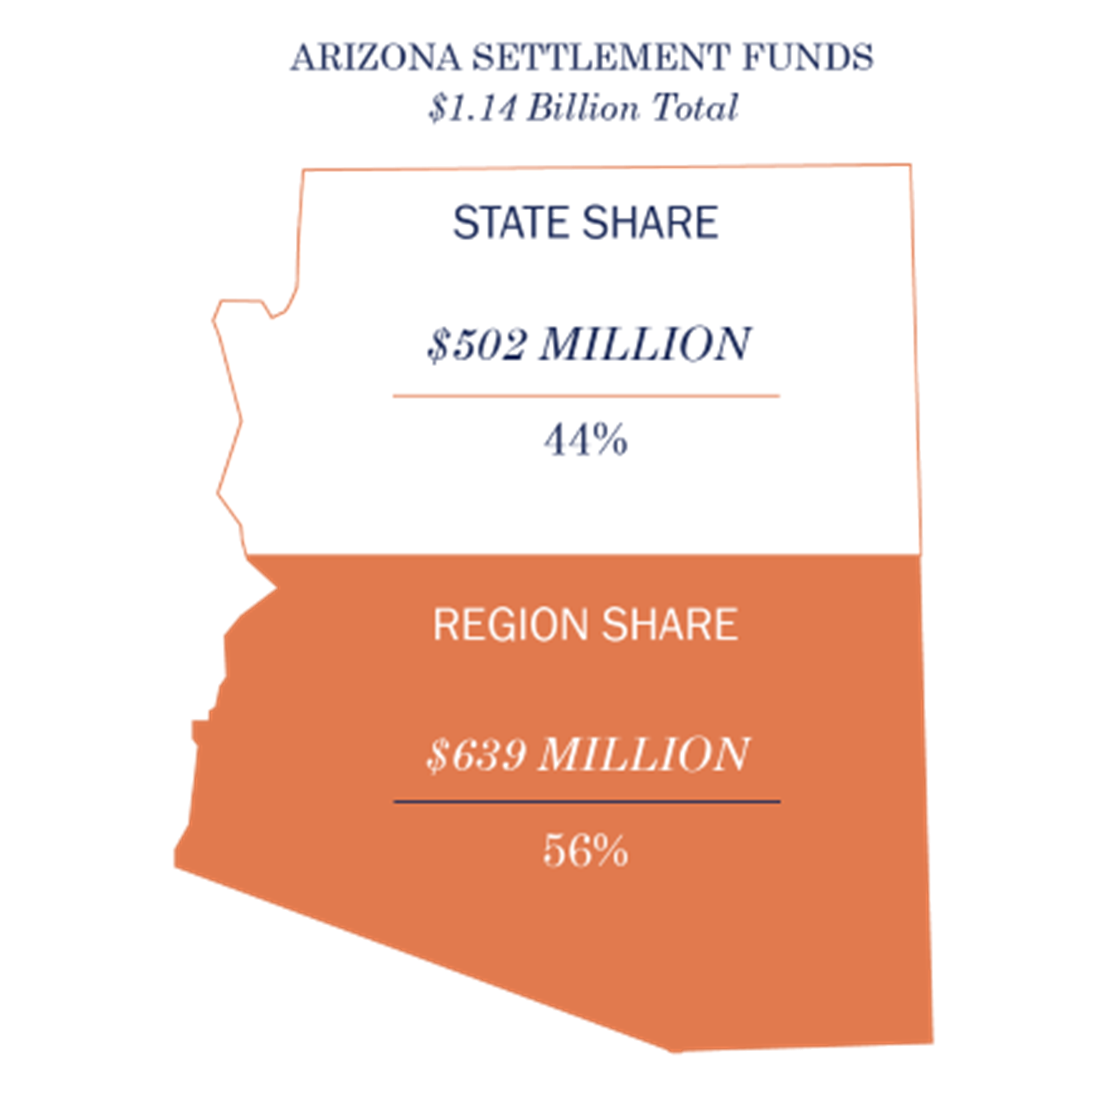 Outline of an Arizona state map partially colored to represent percentage of funds split between state and county share.